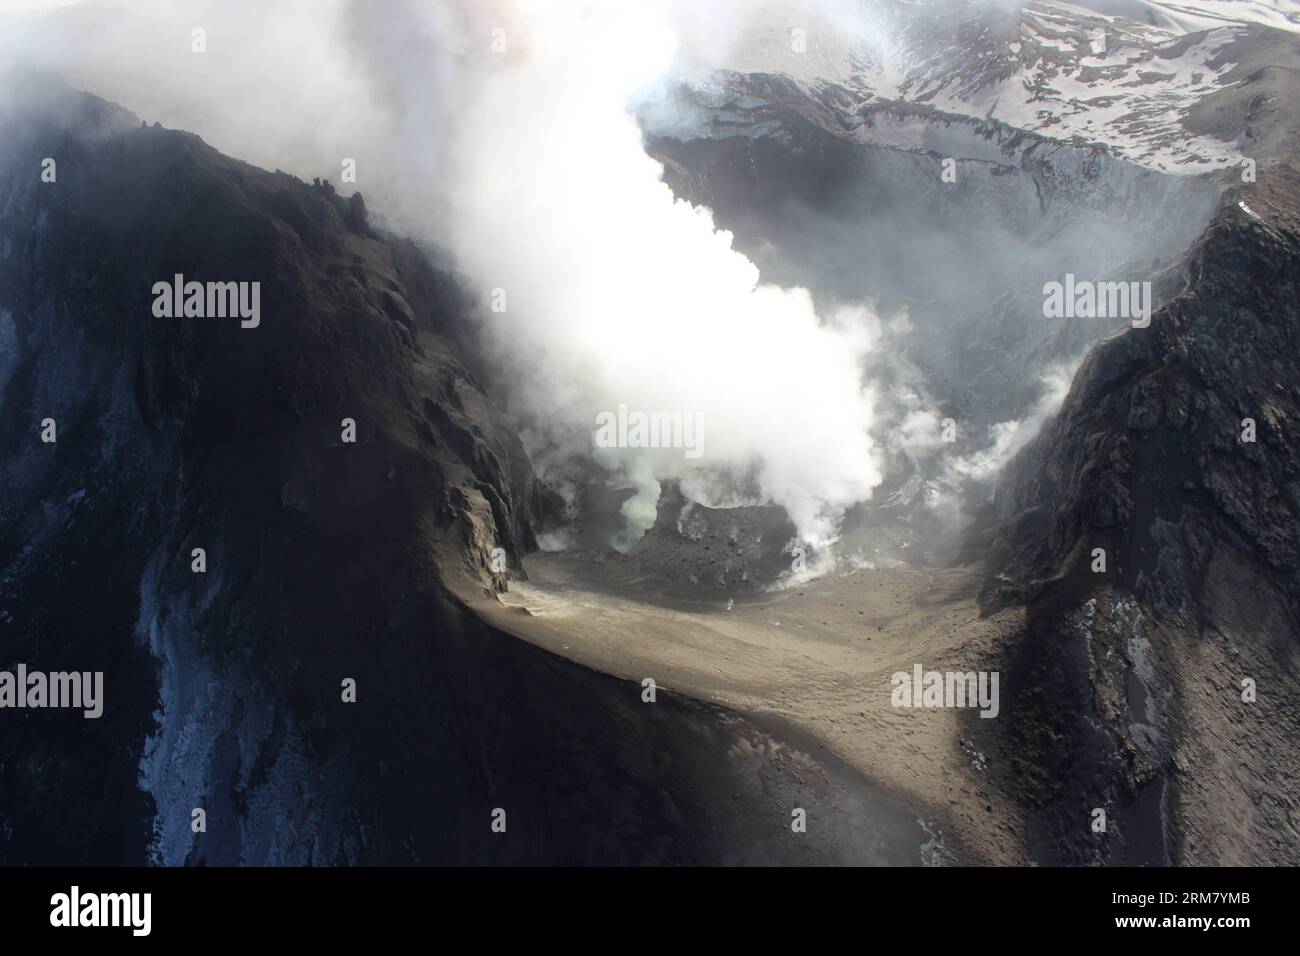 (140320) -- BIOBIO REGION, March 20, 2014 (Xinhua) -- Image taken on May 24, 2013, provided by Chile s National Service of Geology and Mining (SERNAGEOMIN) and Chile s National Emergency Office (ONEMI), shows Copahue volcano spewing ash in Biobio Region, Chile. The Copahue volcano with 3,000 meters high is located in the Andes mountain range. On Thursday the ONEMI decreed that the activity of the volcano is at Orange Level, which means that could erupt in a time not determined. Specifically the institution reported that the monitoring station installed in the area recorded an increase in volca Stock Photo